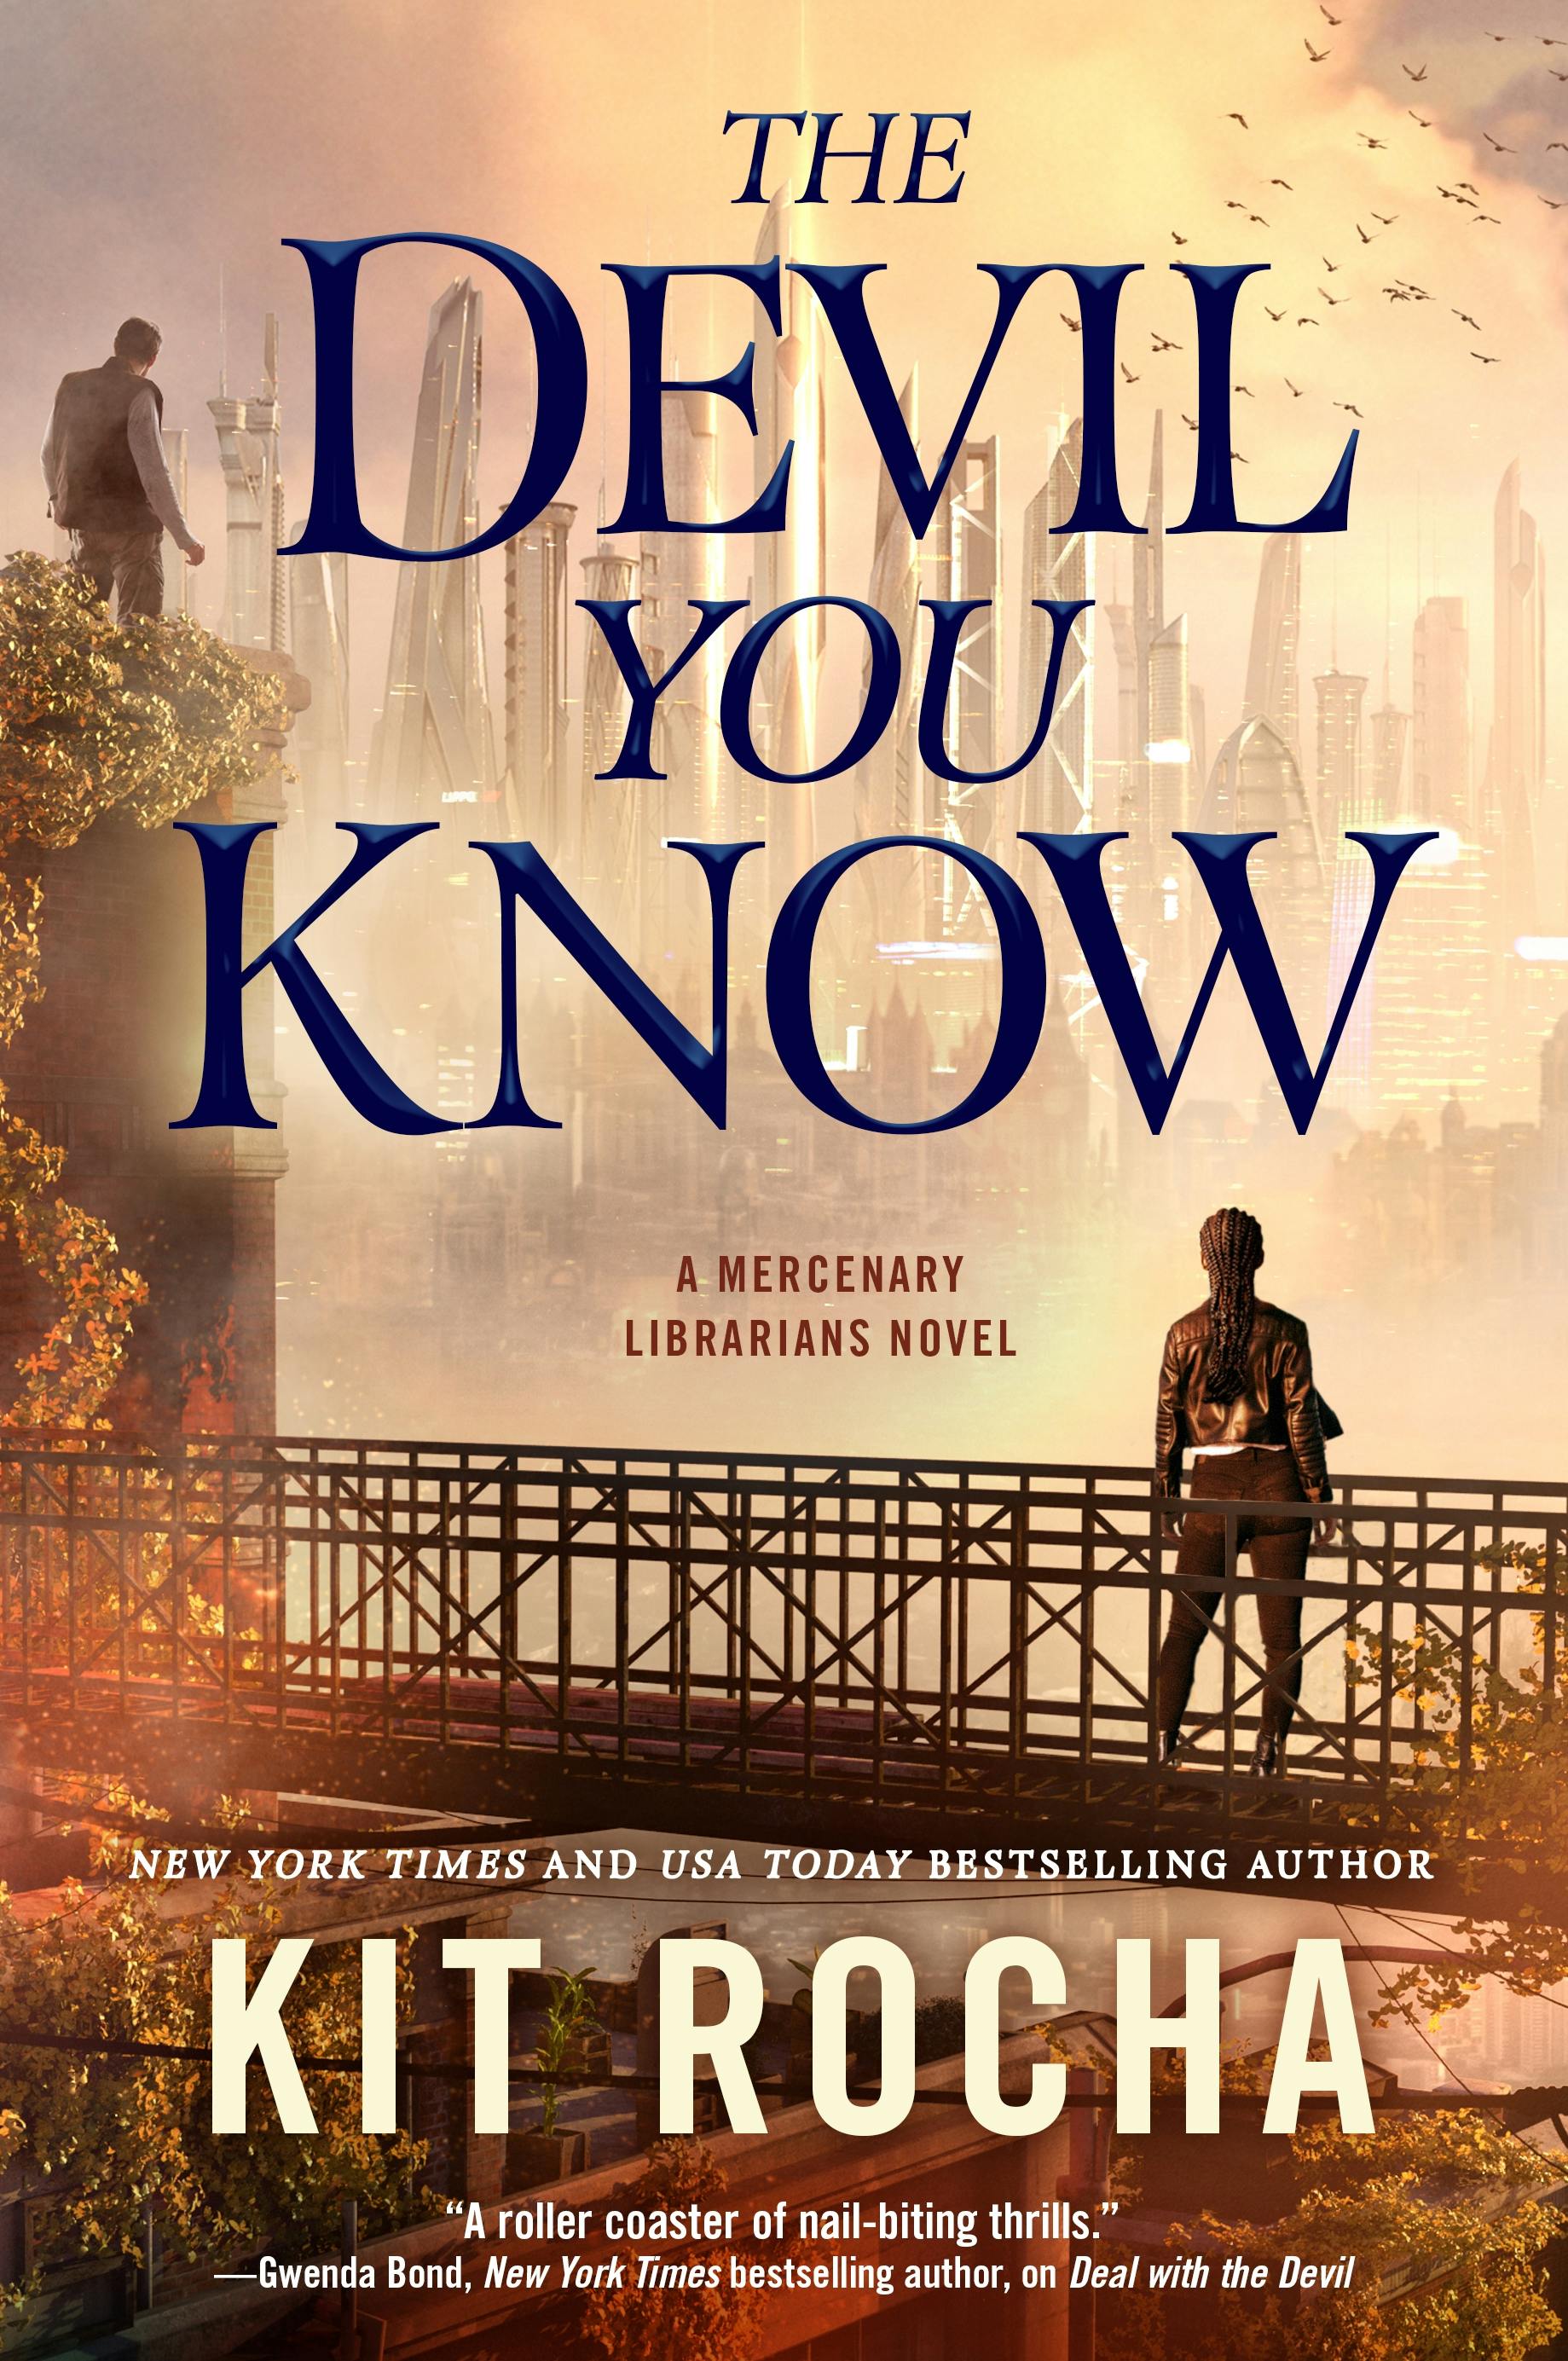 Cover for the book titled as: The Devil You Know